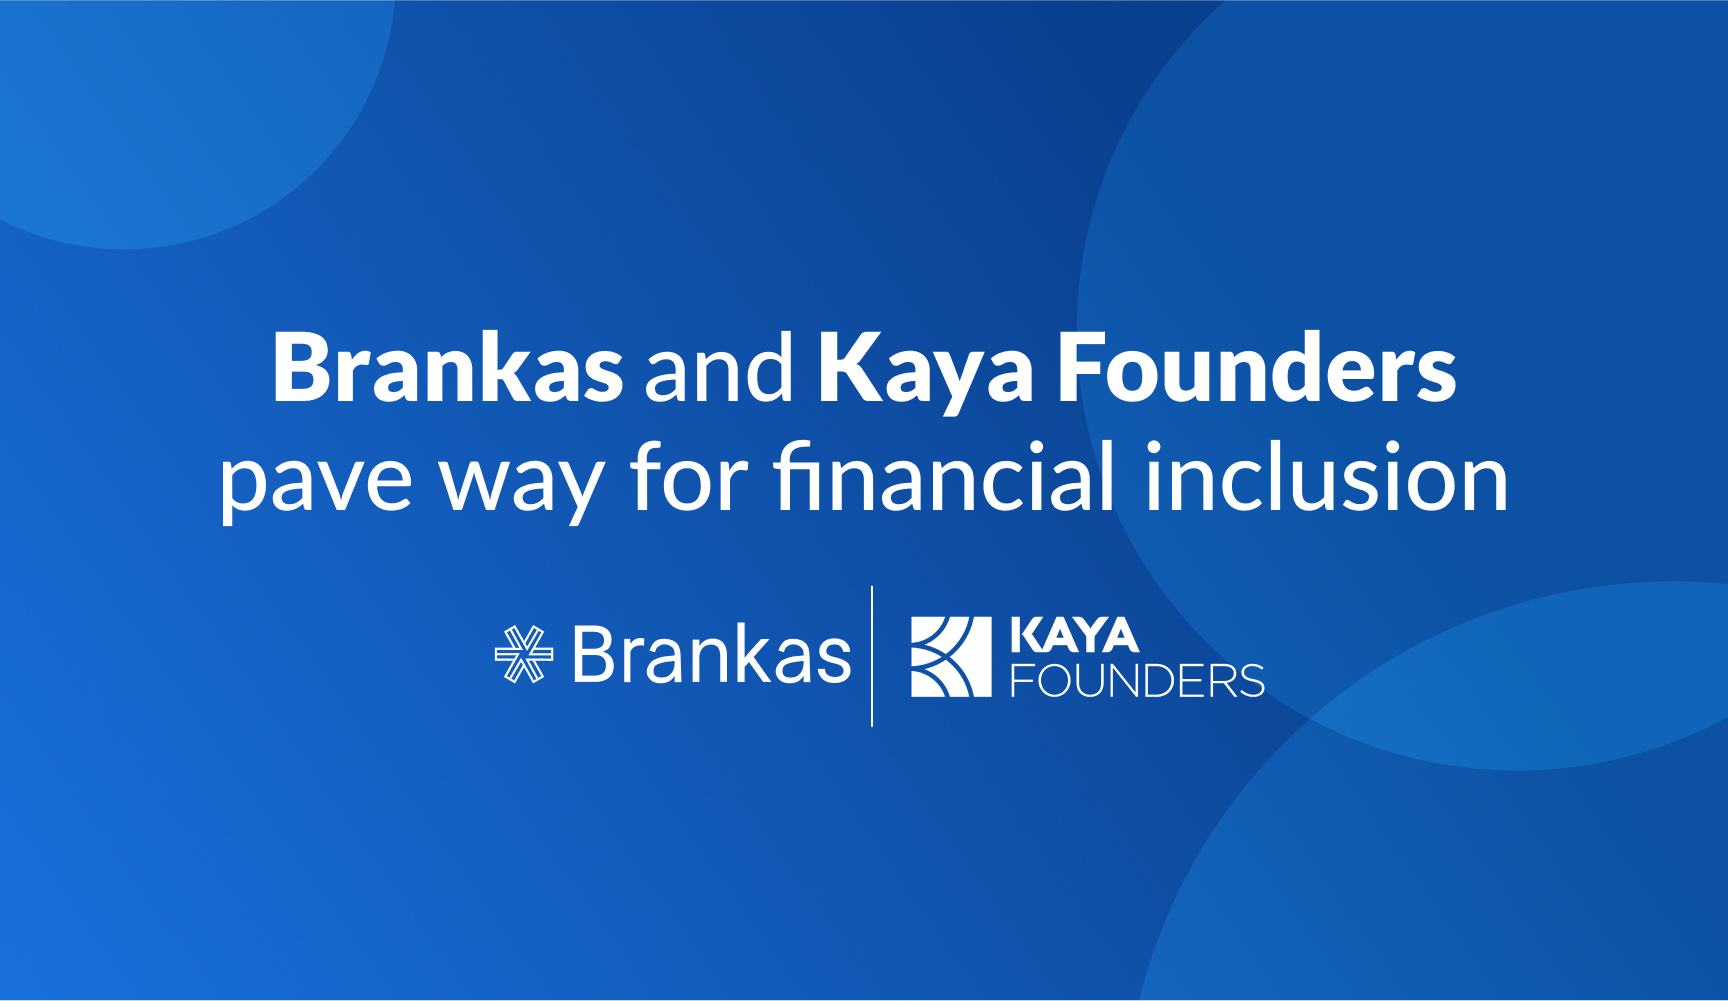 Brankas and Kaya Founders Pave Way for Financial Inclusion